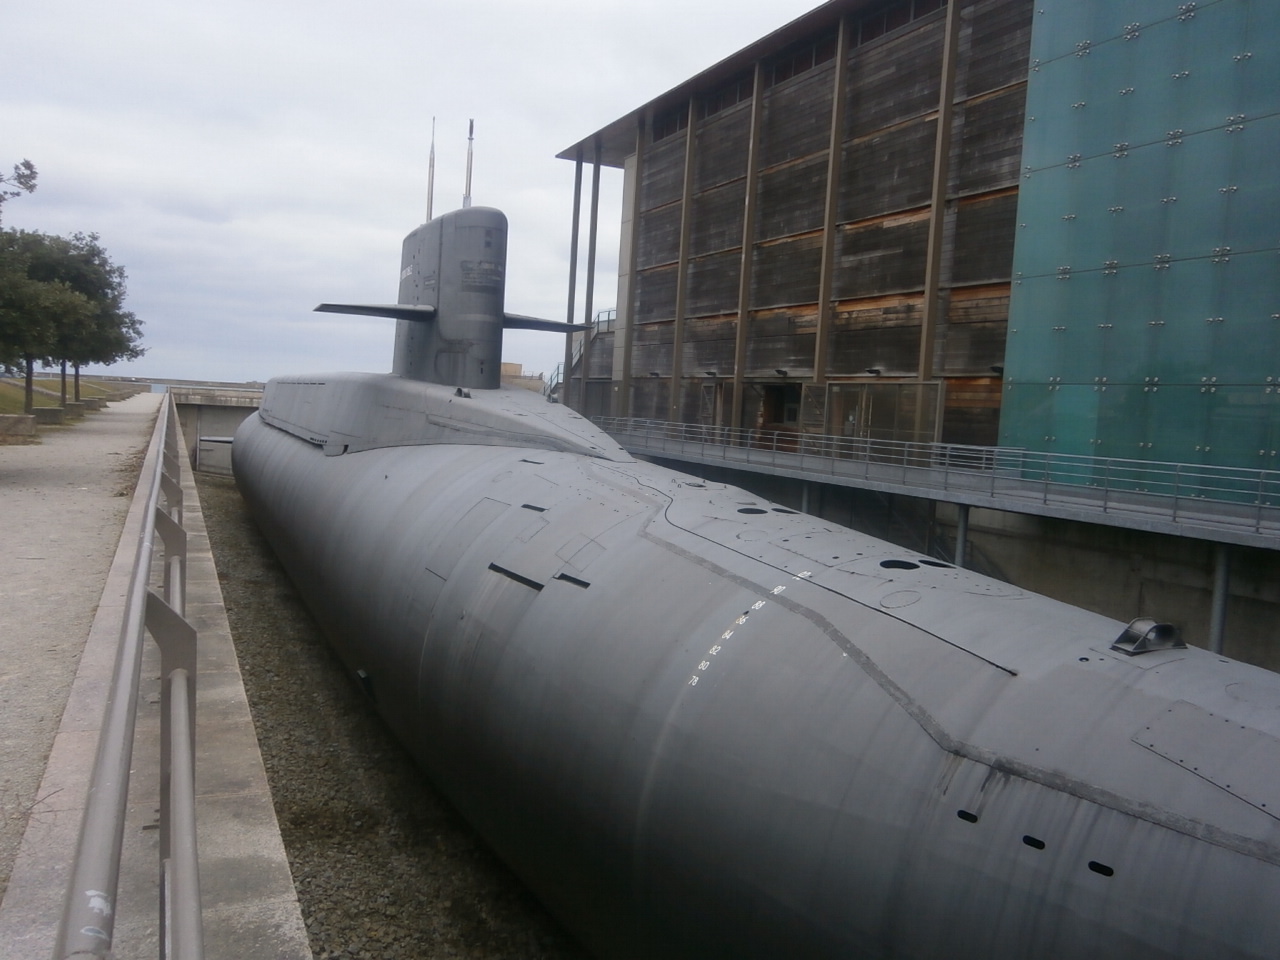 Sous-marin le Redoutable, Cherbourg